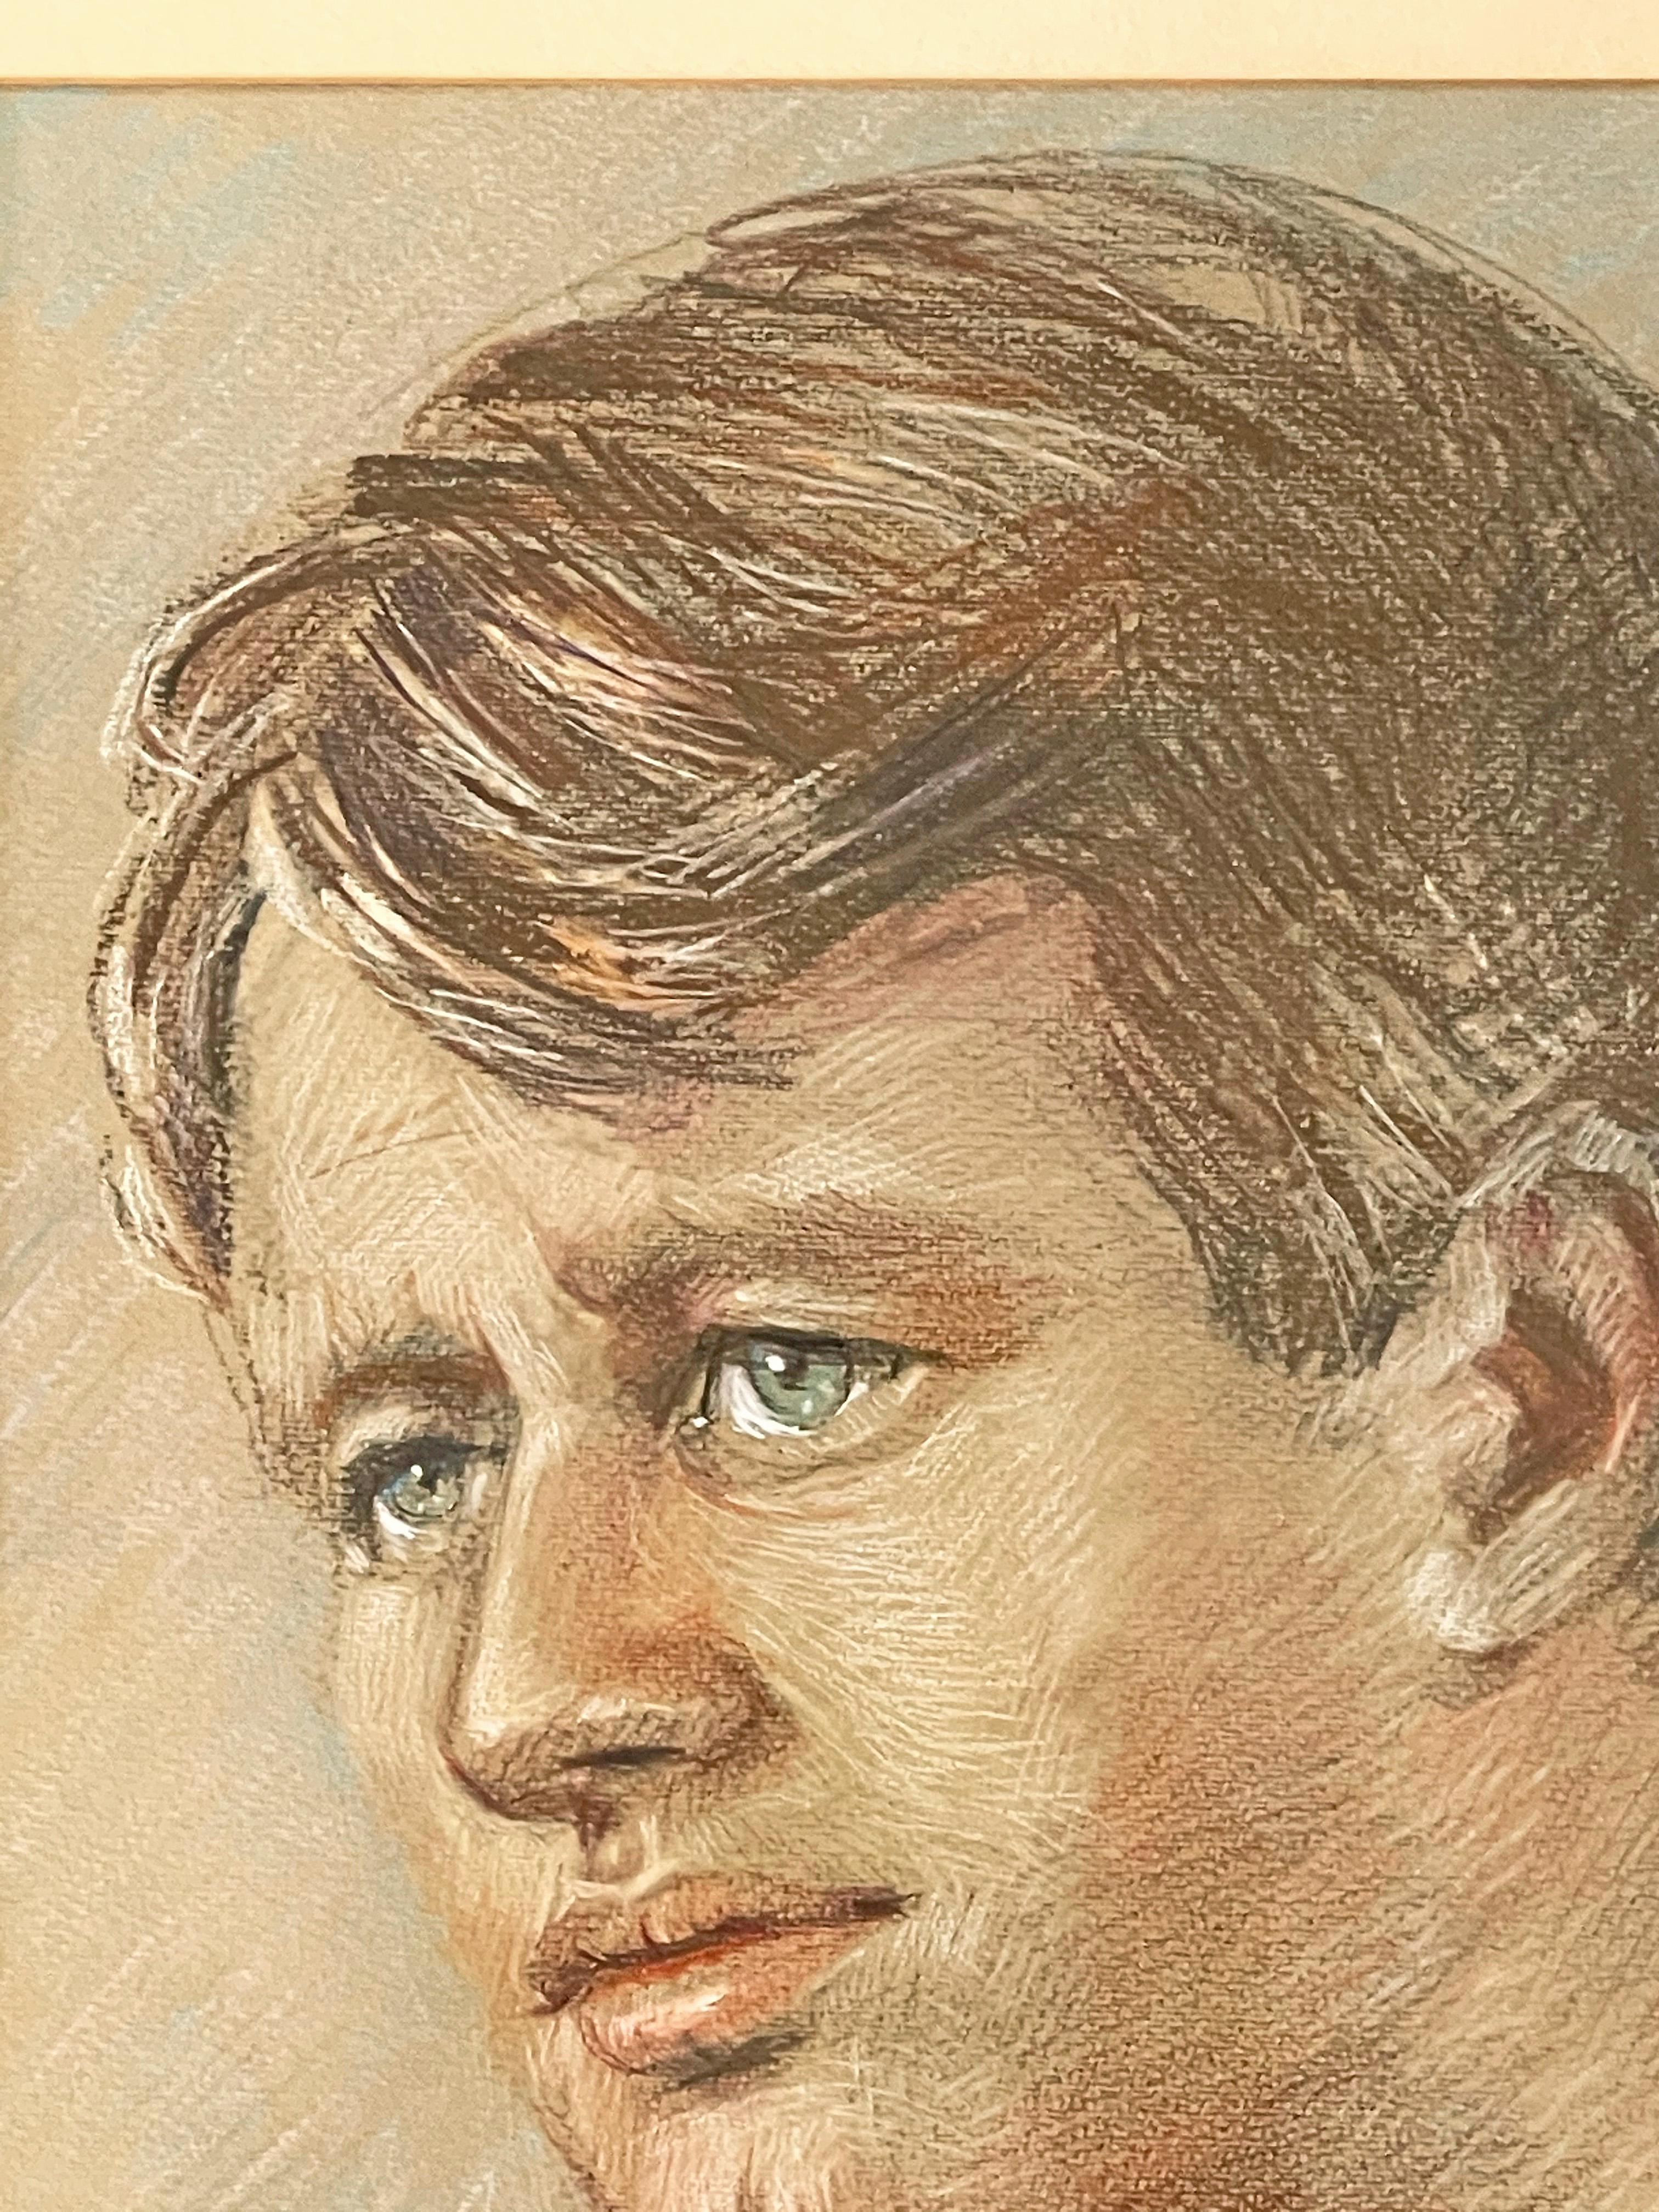 Although there is no evidence that Paul Cadmus knew Robert F. Kennedy, this portrait of a handsome, youthful man with blue eyes and a thick head of hair suggests that the artist admired Kennedy and may have drawn this portrait from afar. Cadmus